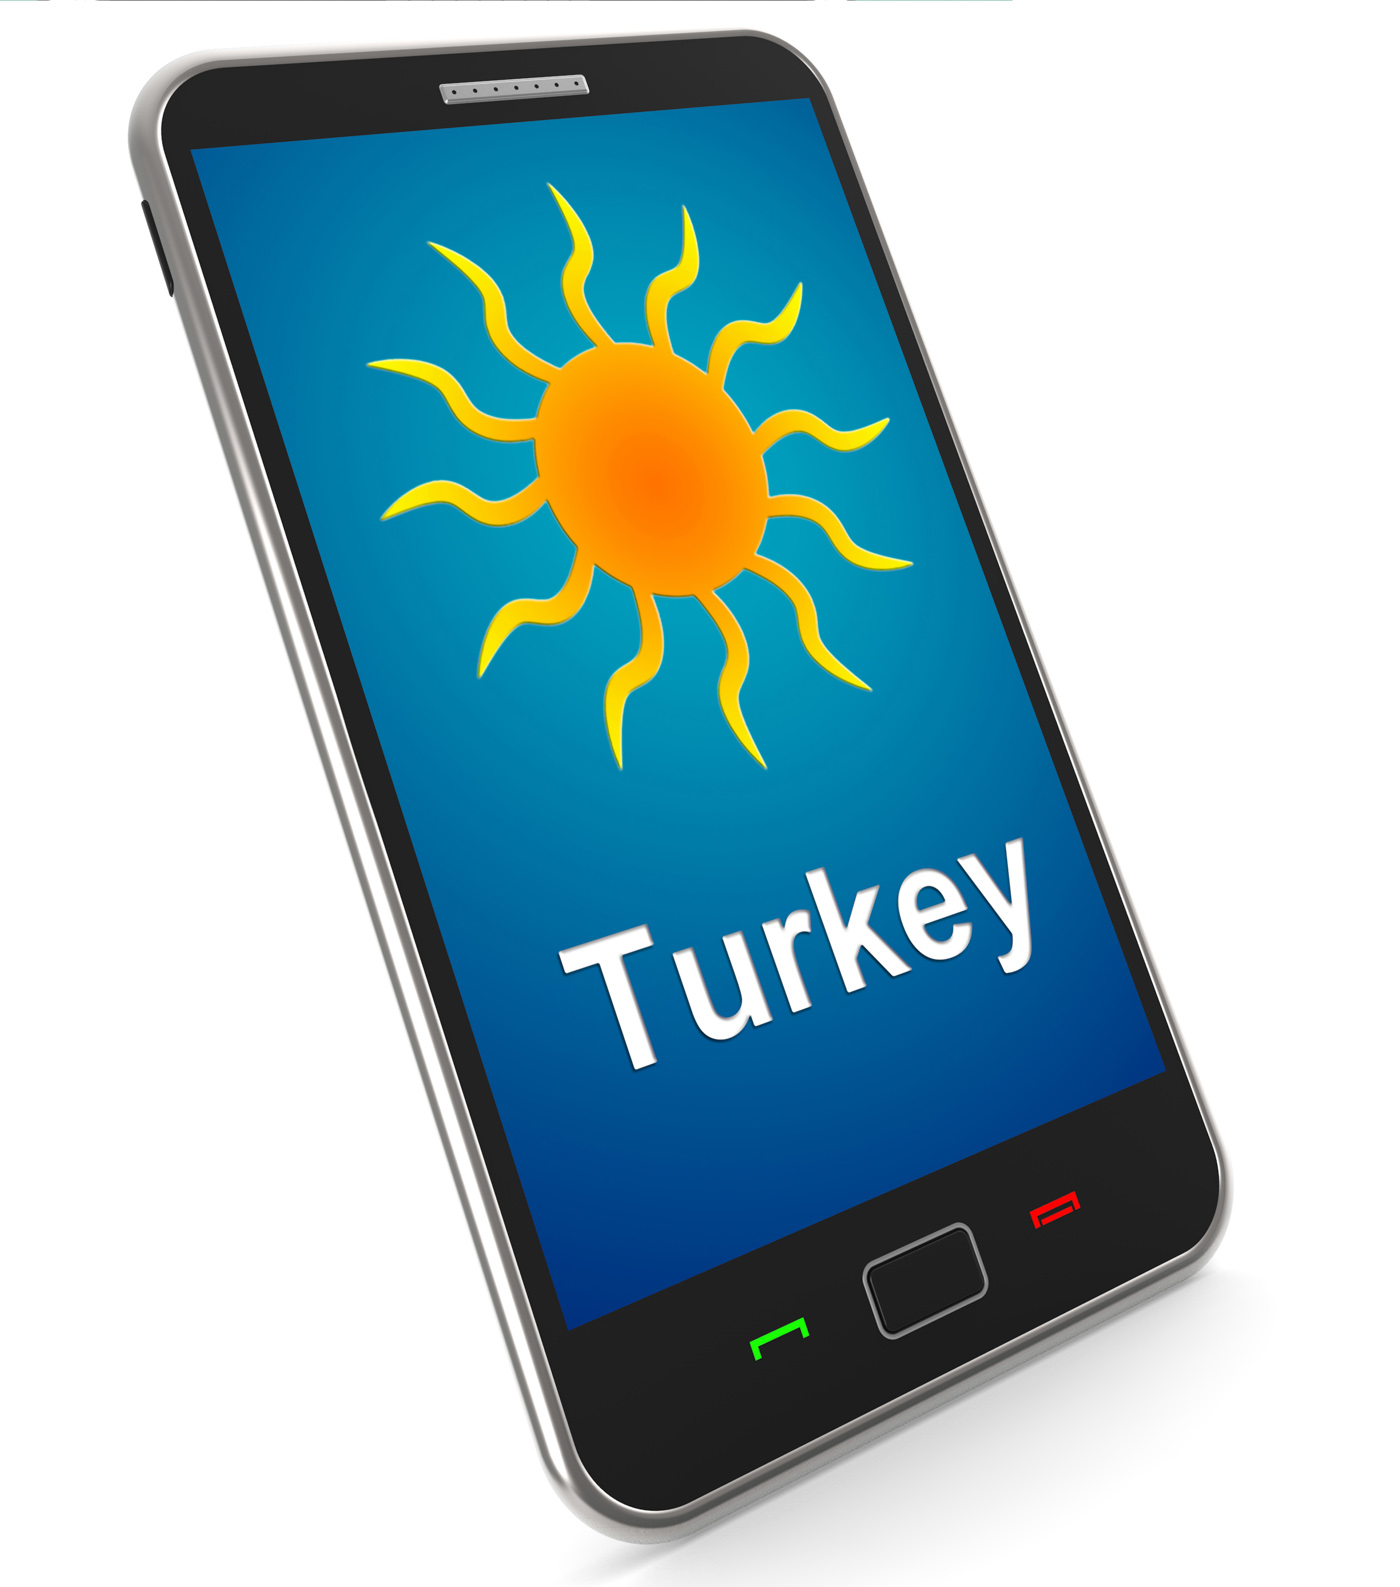 Turkey on mobile means holidays and sunny weather photo